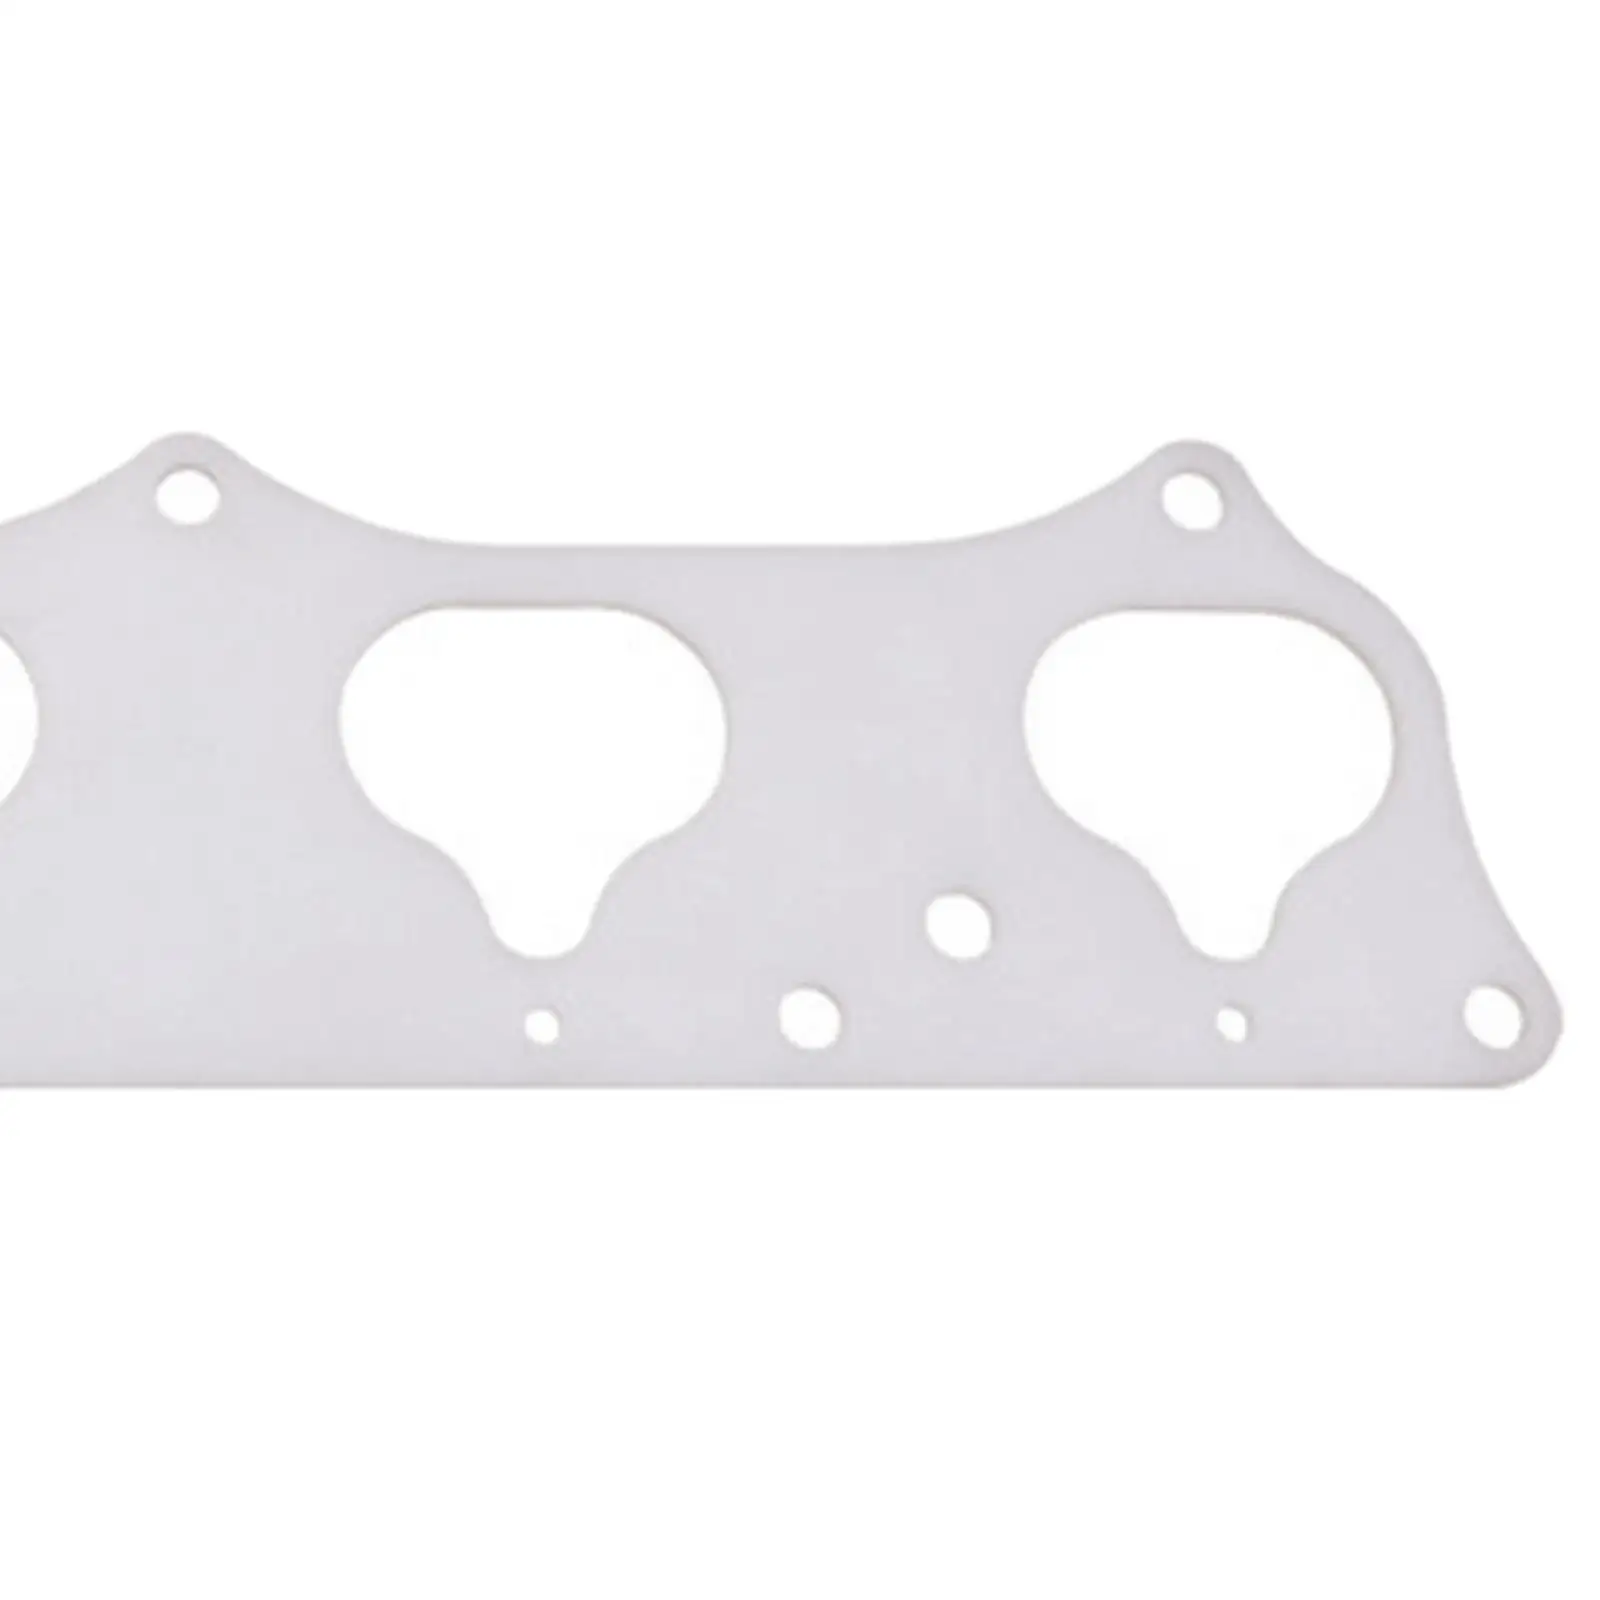 Thermal Intake Manifold Gasket Durable High Performance Spare Parts Accessories Replaces for Swap K20A/A2/A3/Z1 K-series